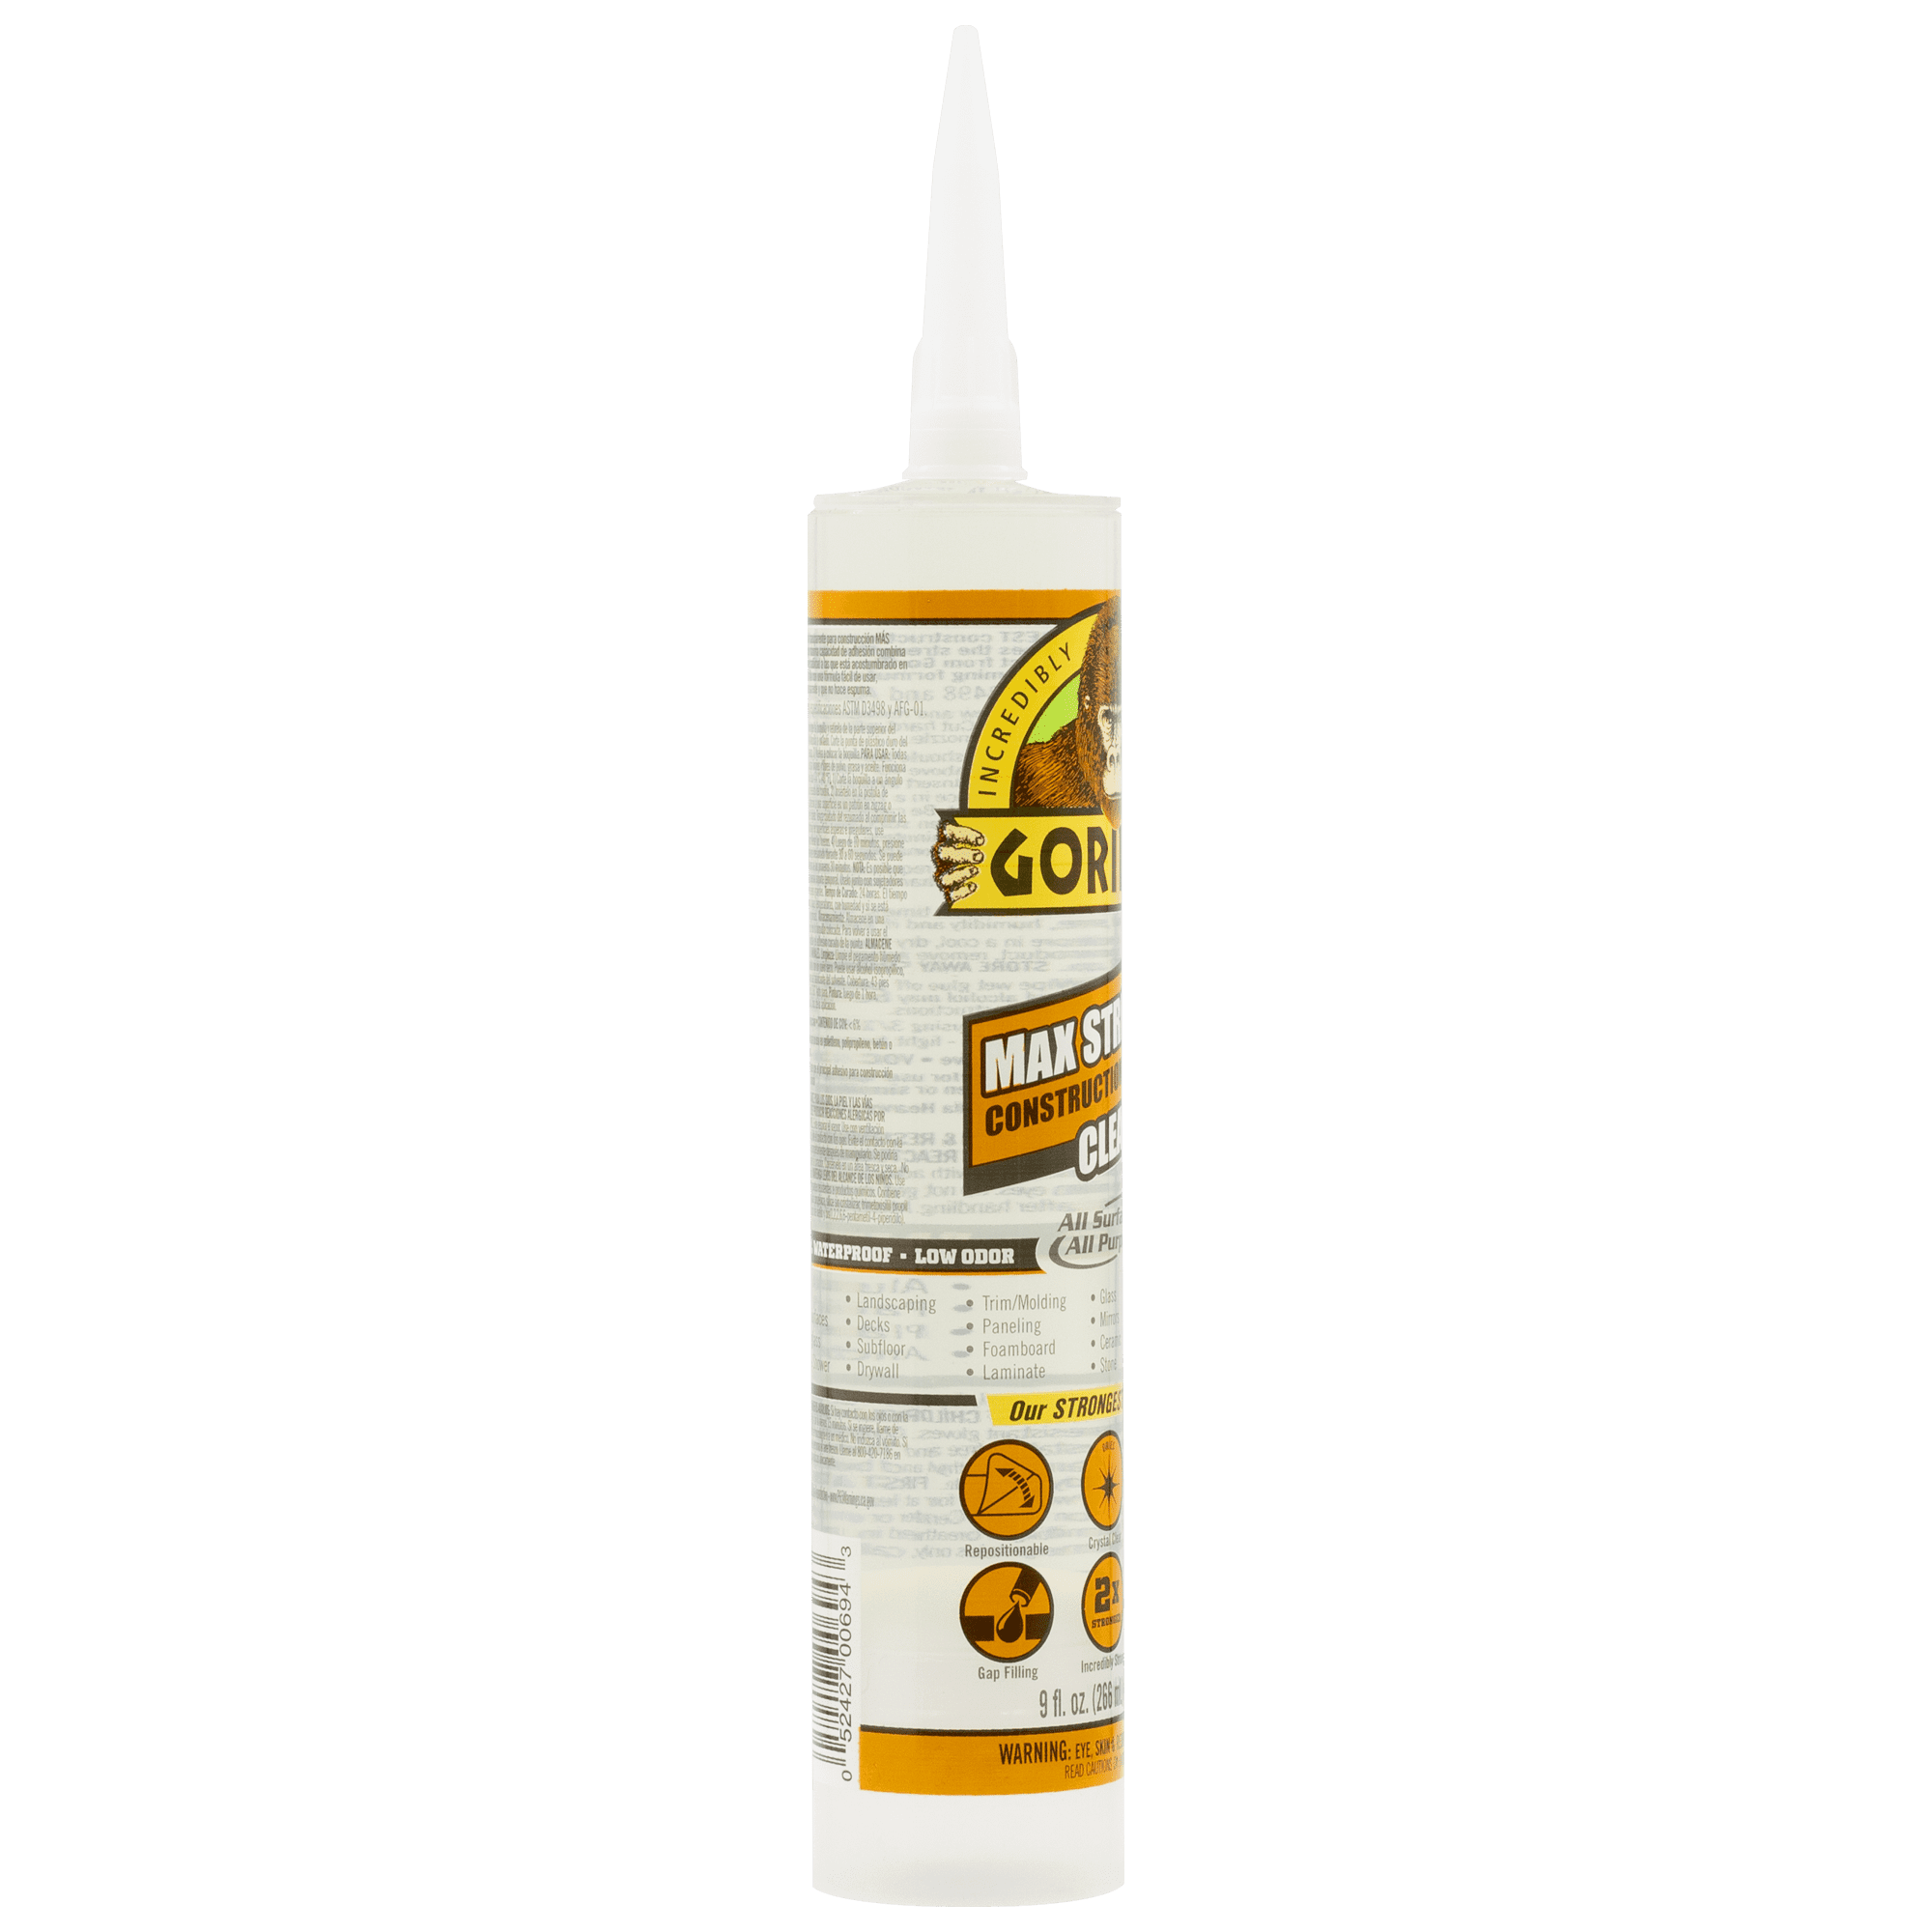 Gorilla 2.5 oz. Max Strength Construction Adhesive Clear